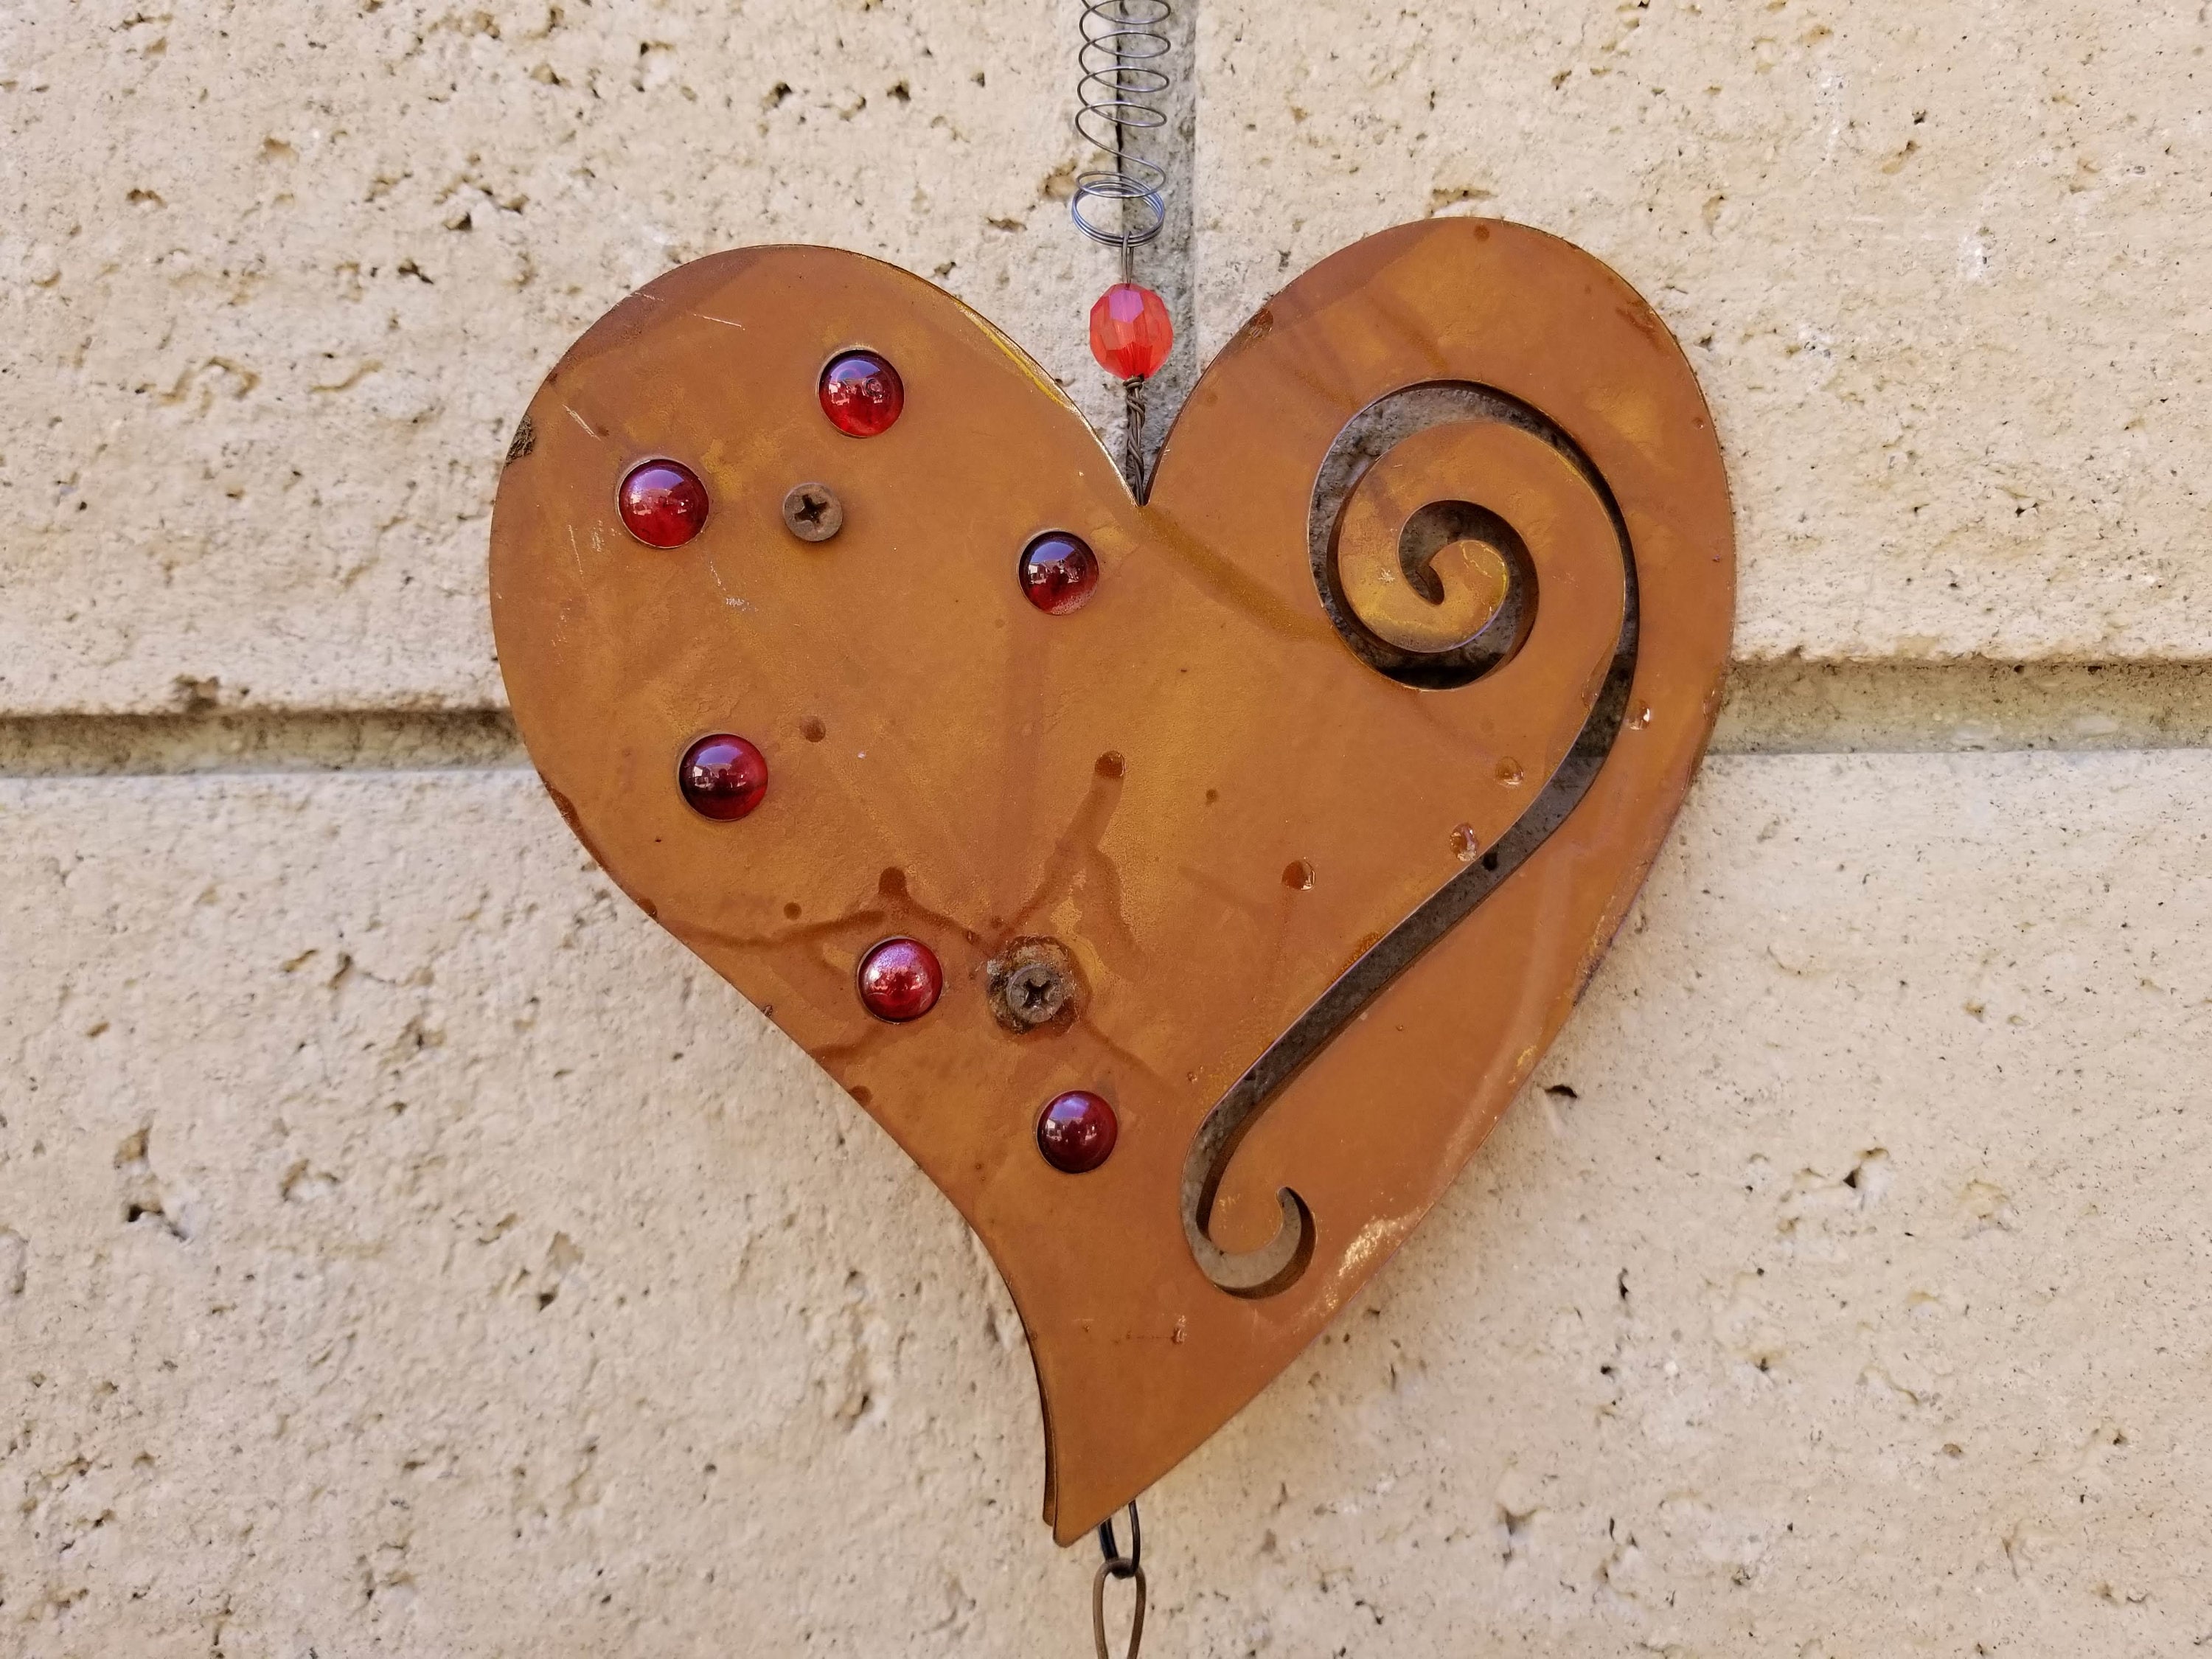 Rustic Painted Twig Wooden Heart Decoration - DIY & Crafts